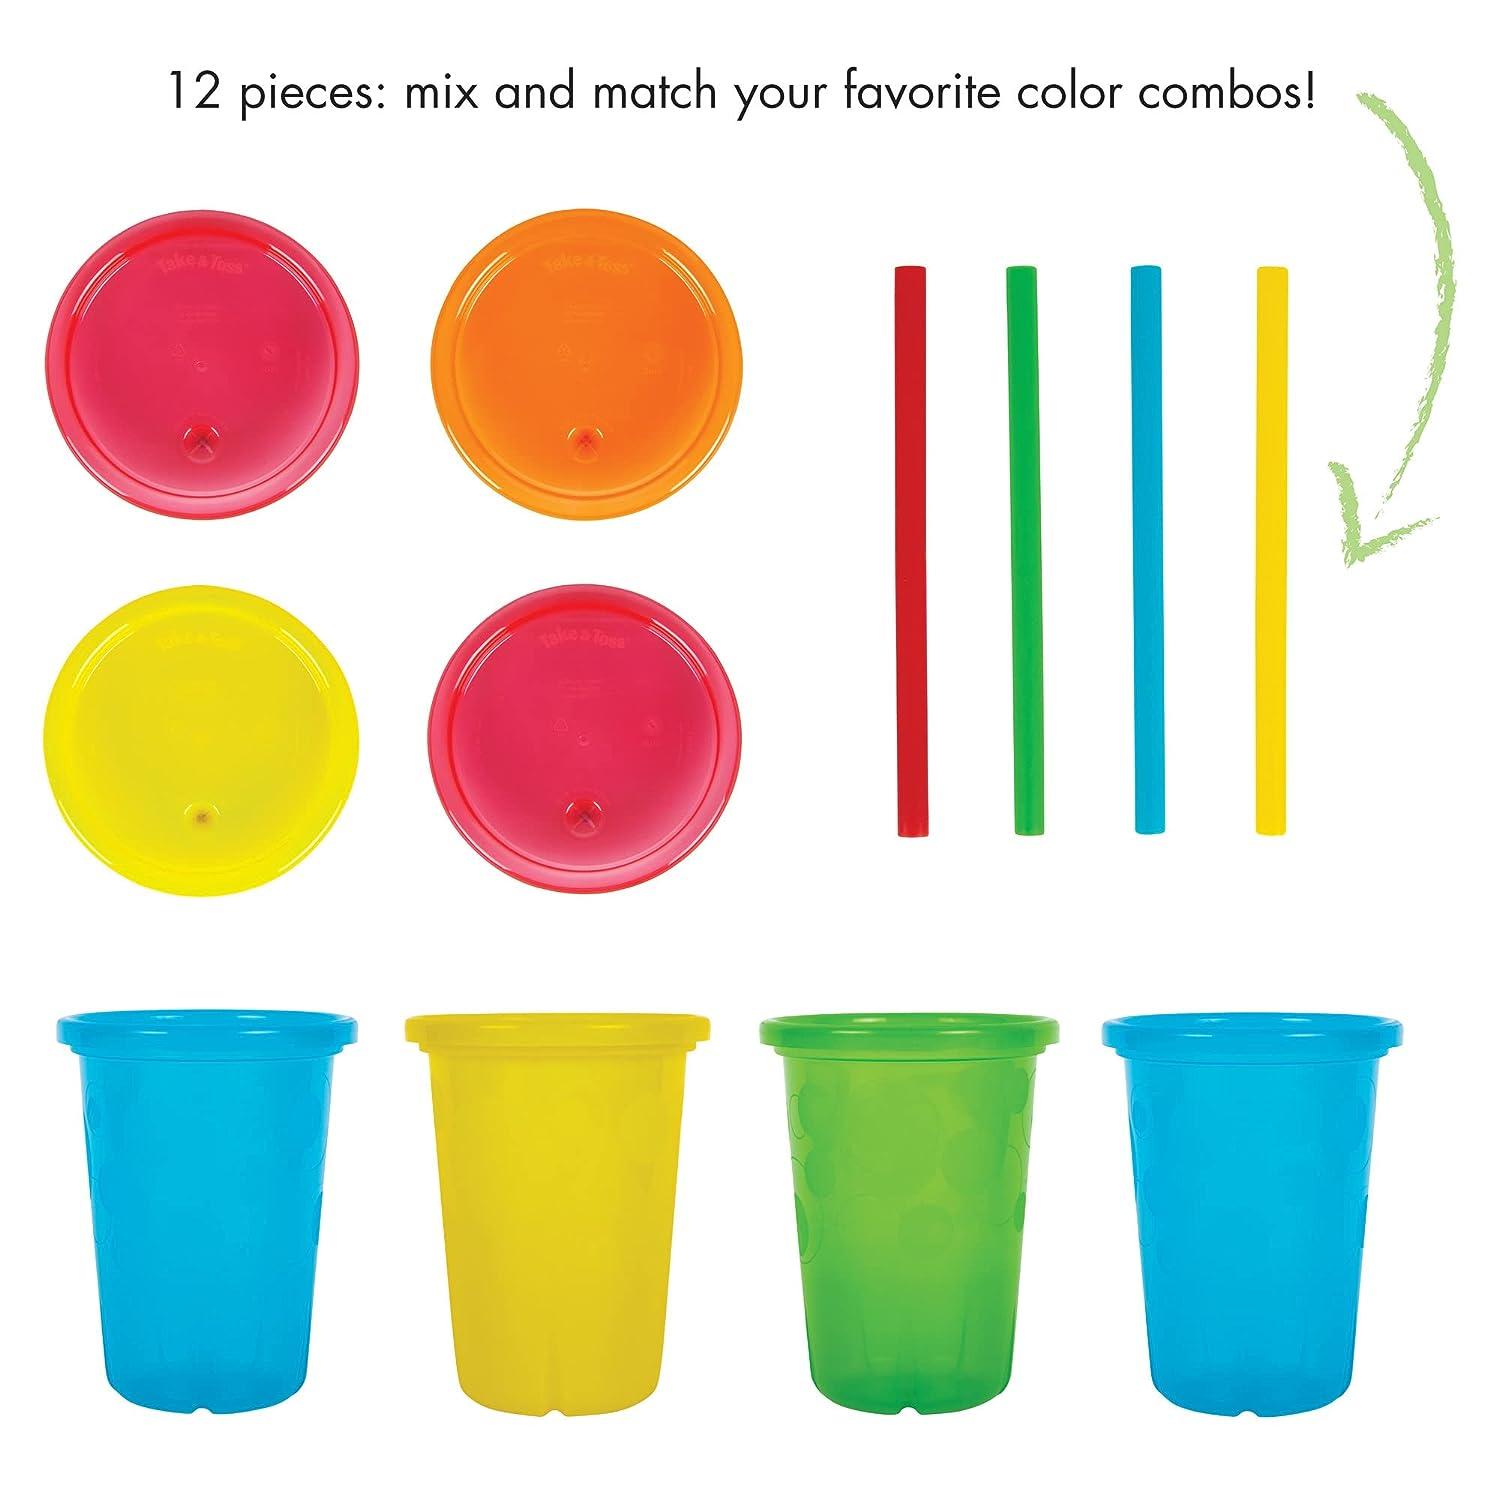 Take and Toss Cups